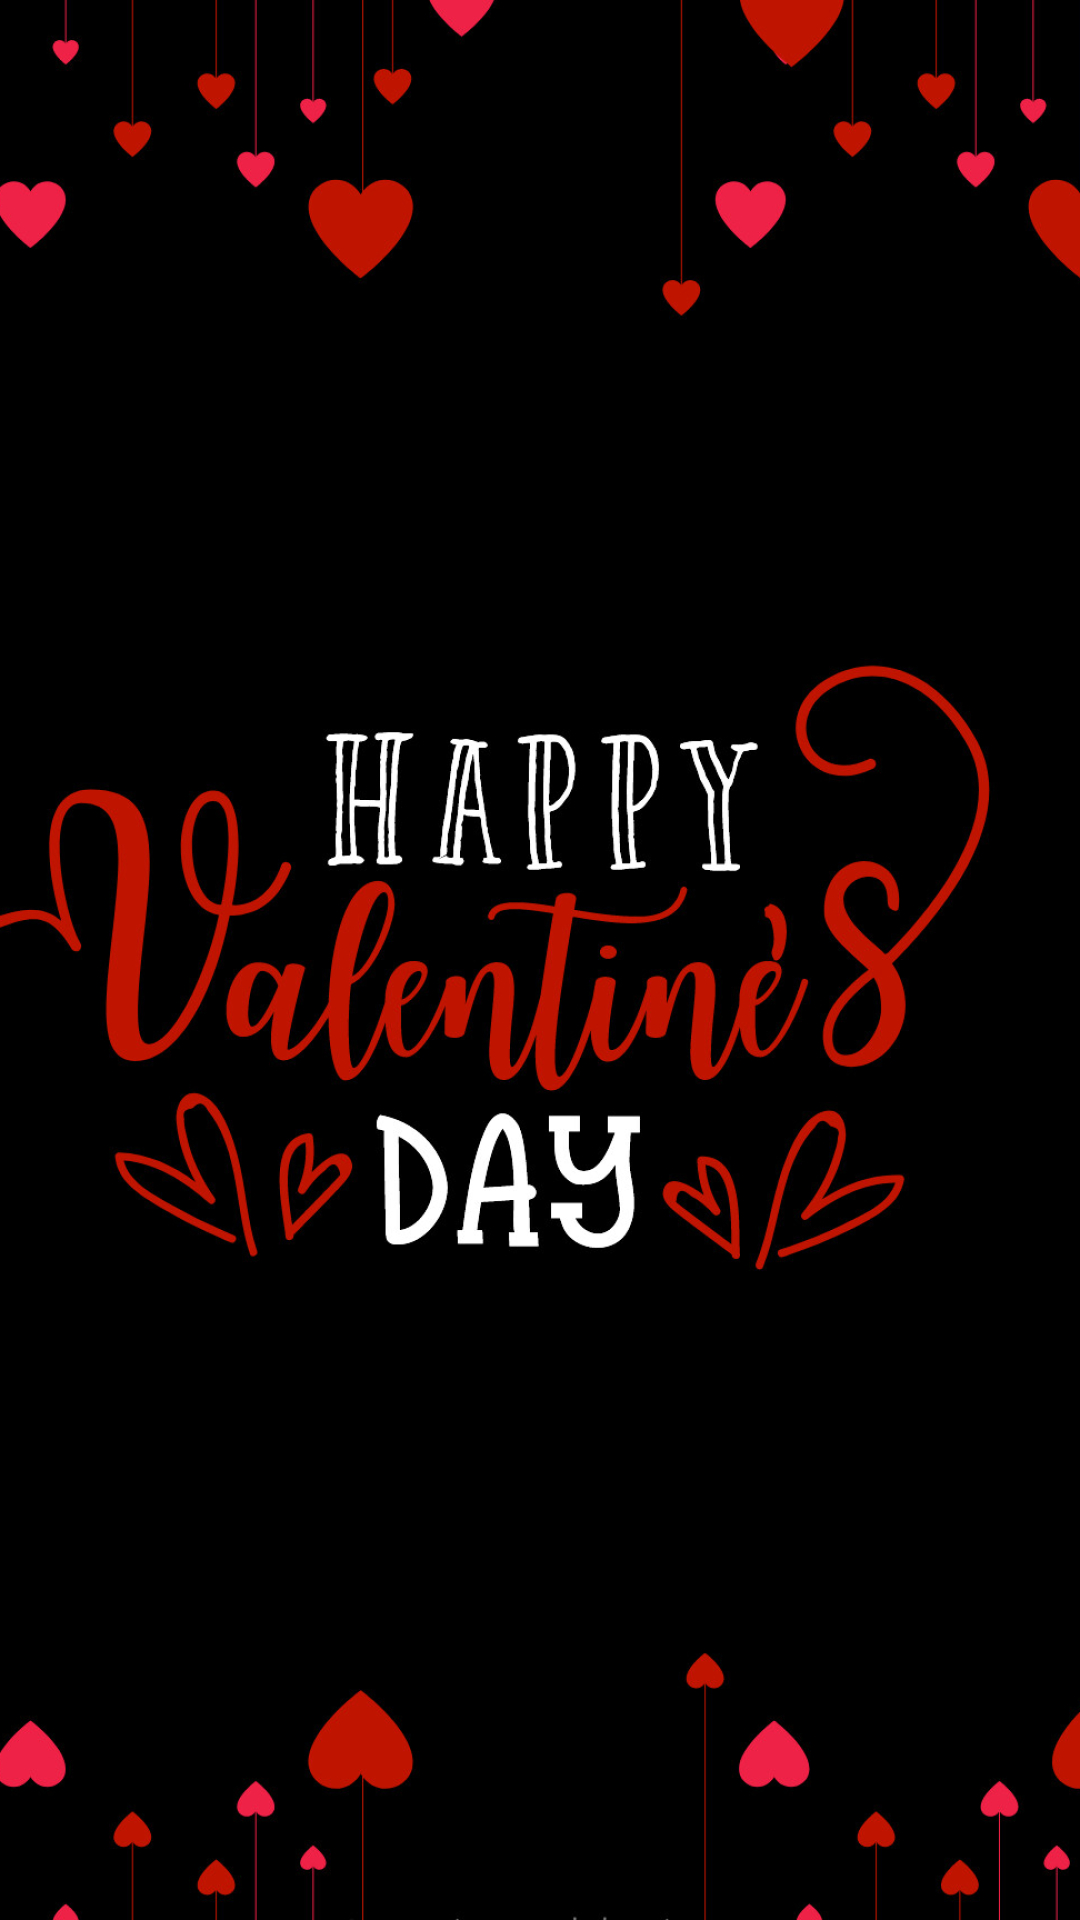 Valentine's Day: An annual festival to celebrate romantic love, friendship and admiration. 1080x1920 Full HD Wallpaper.